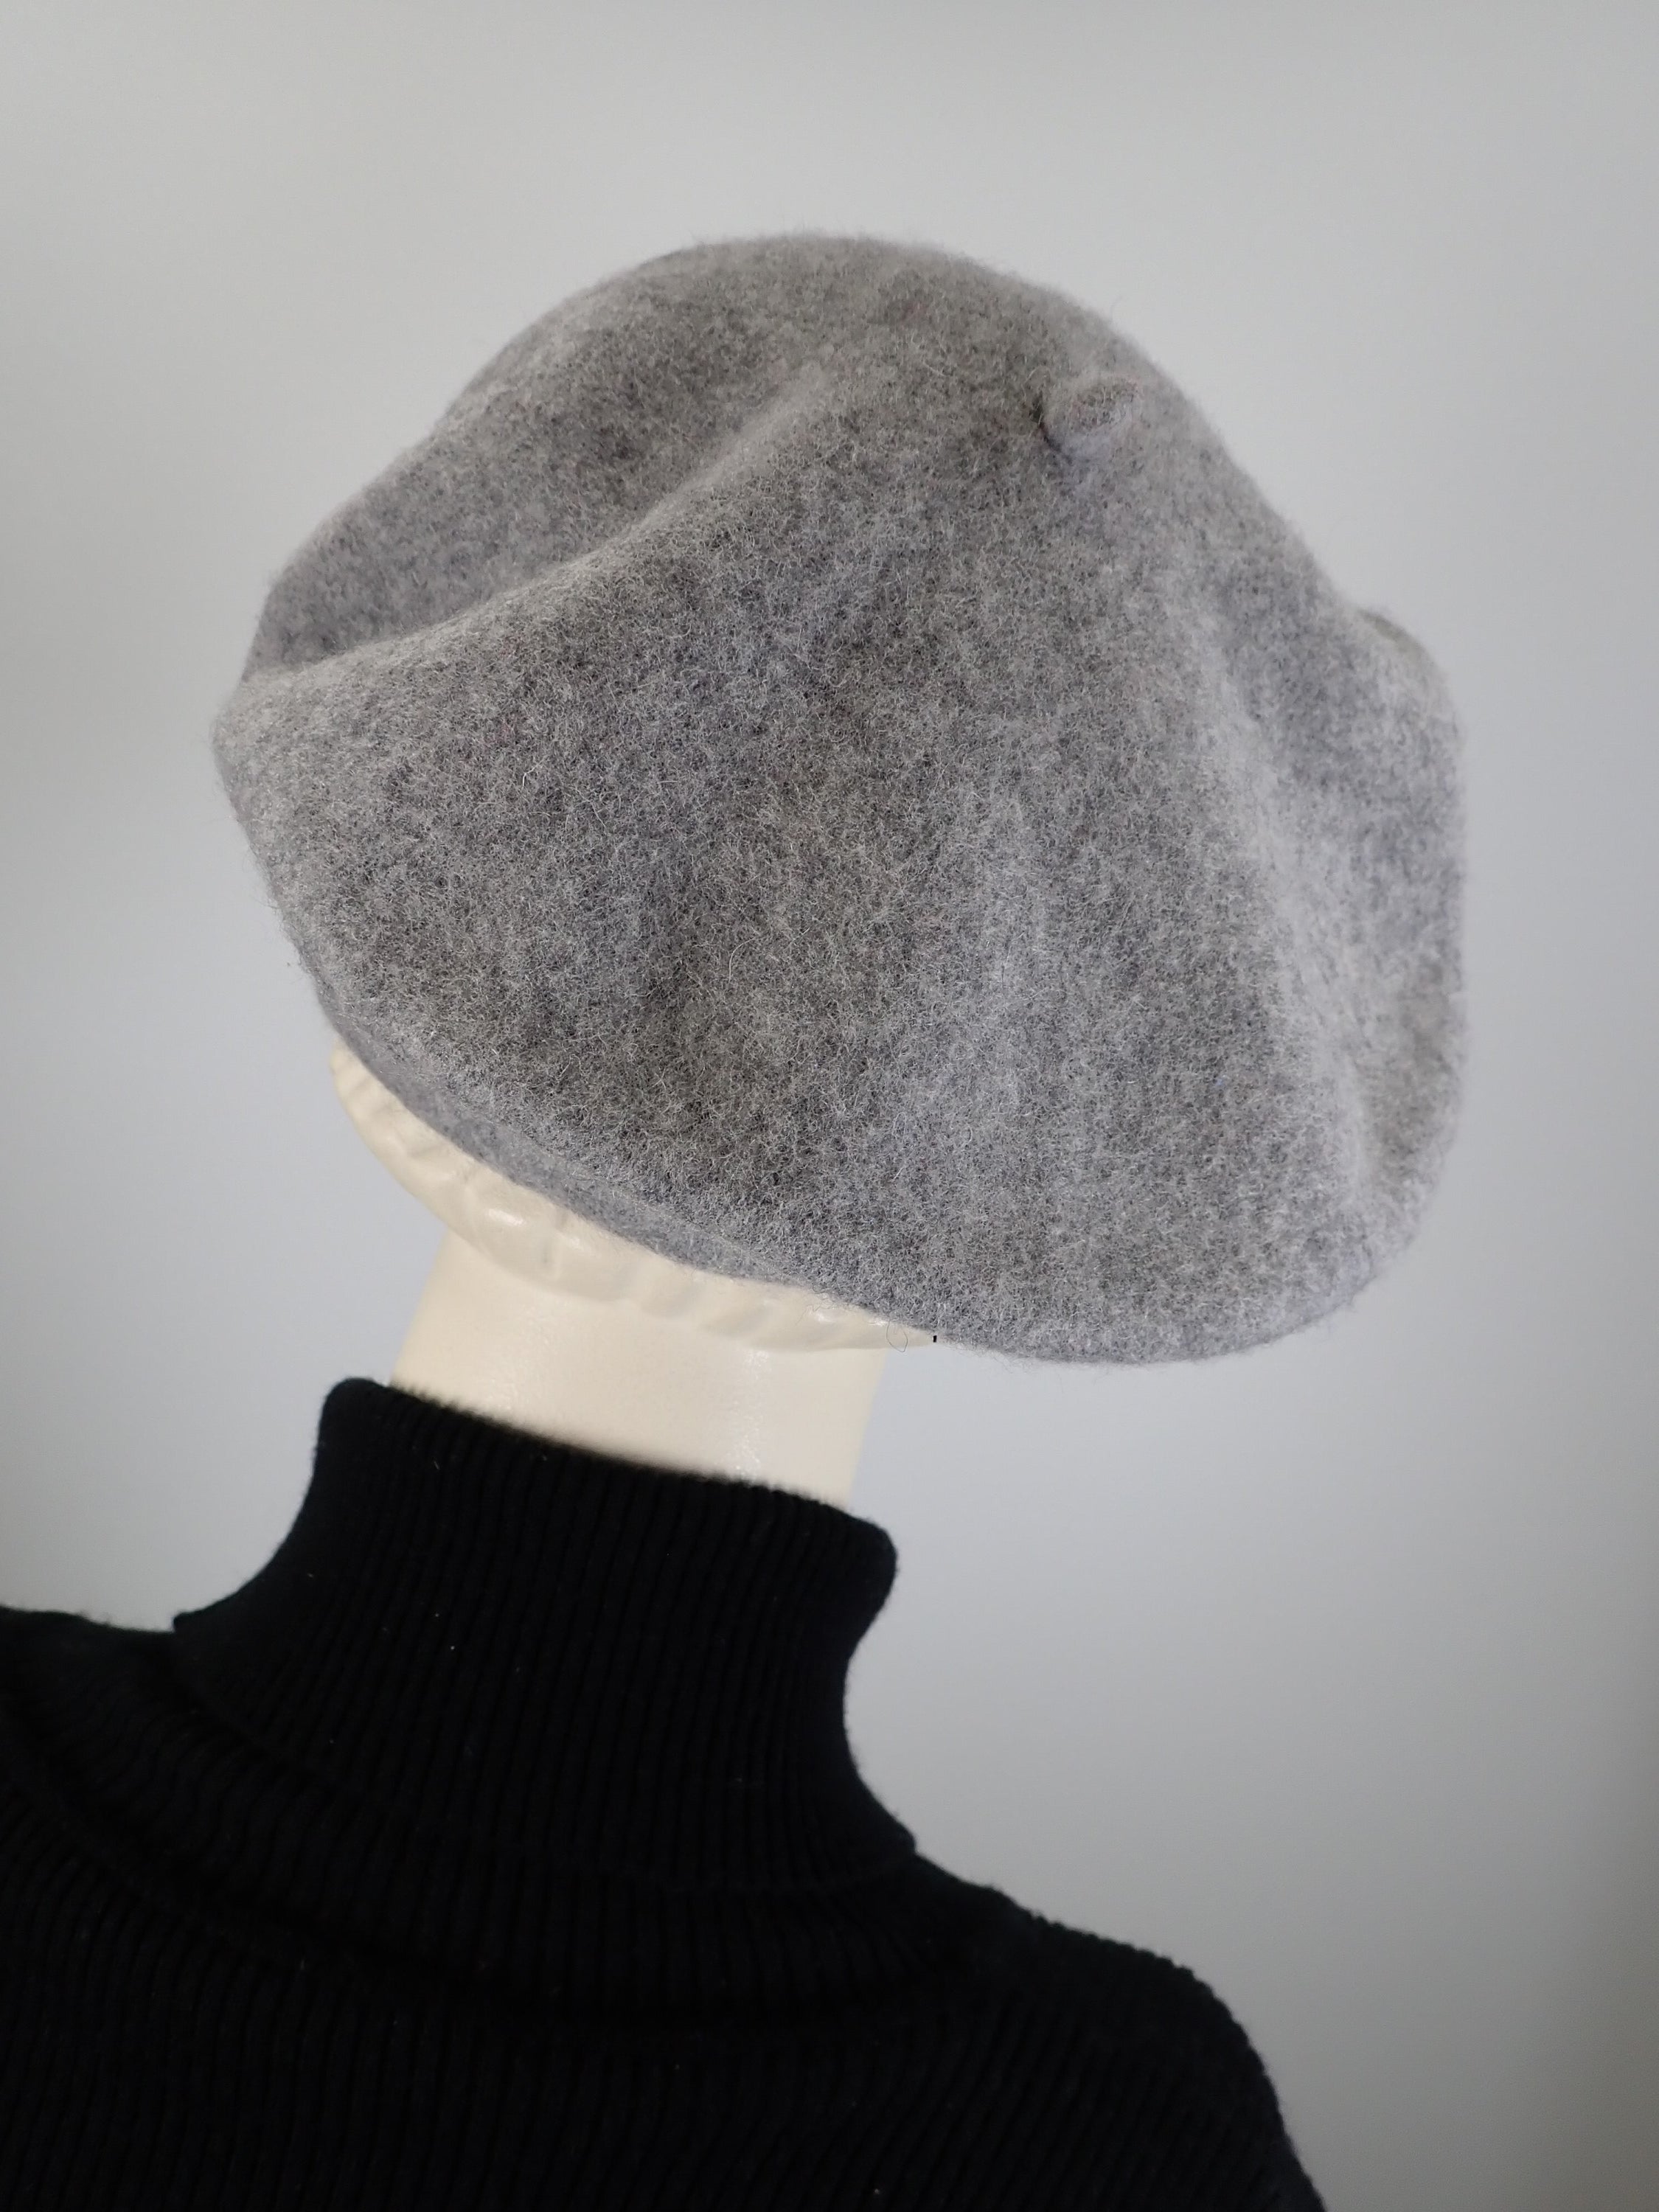 Womens soft light gray beret. French Beret Hat. Felted Wool tam hat. Womens soft Casual Hat. Classic warm travel beret for women.